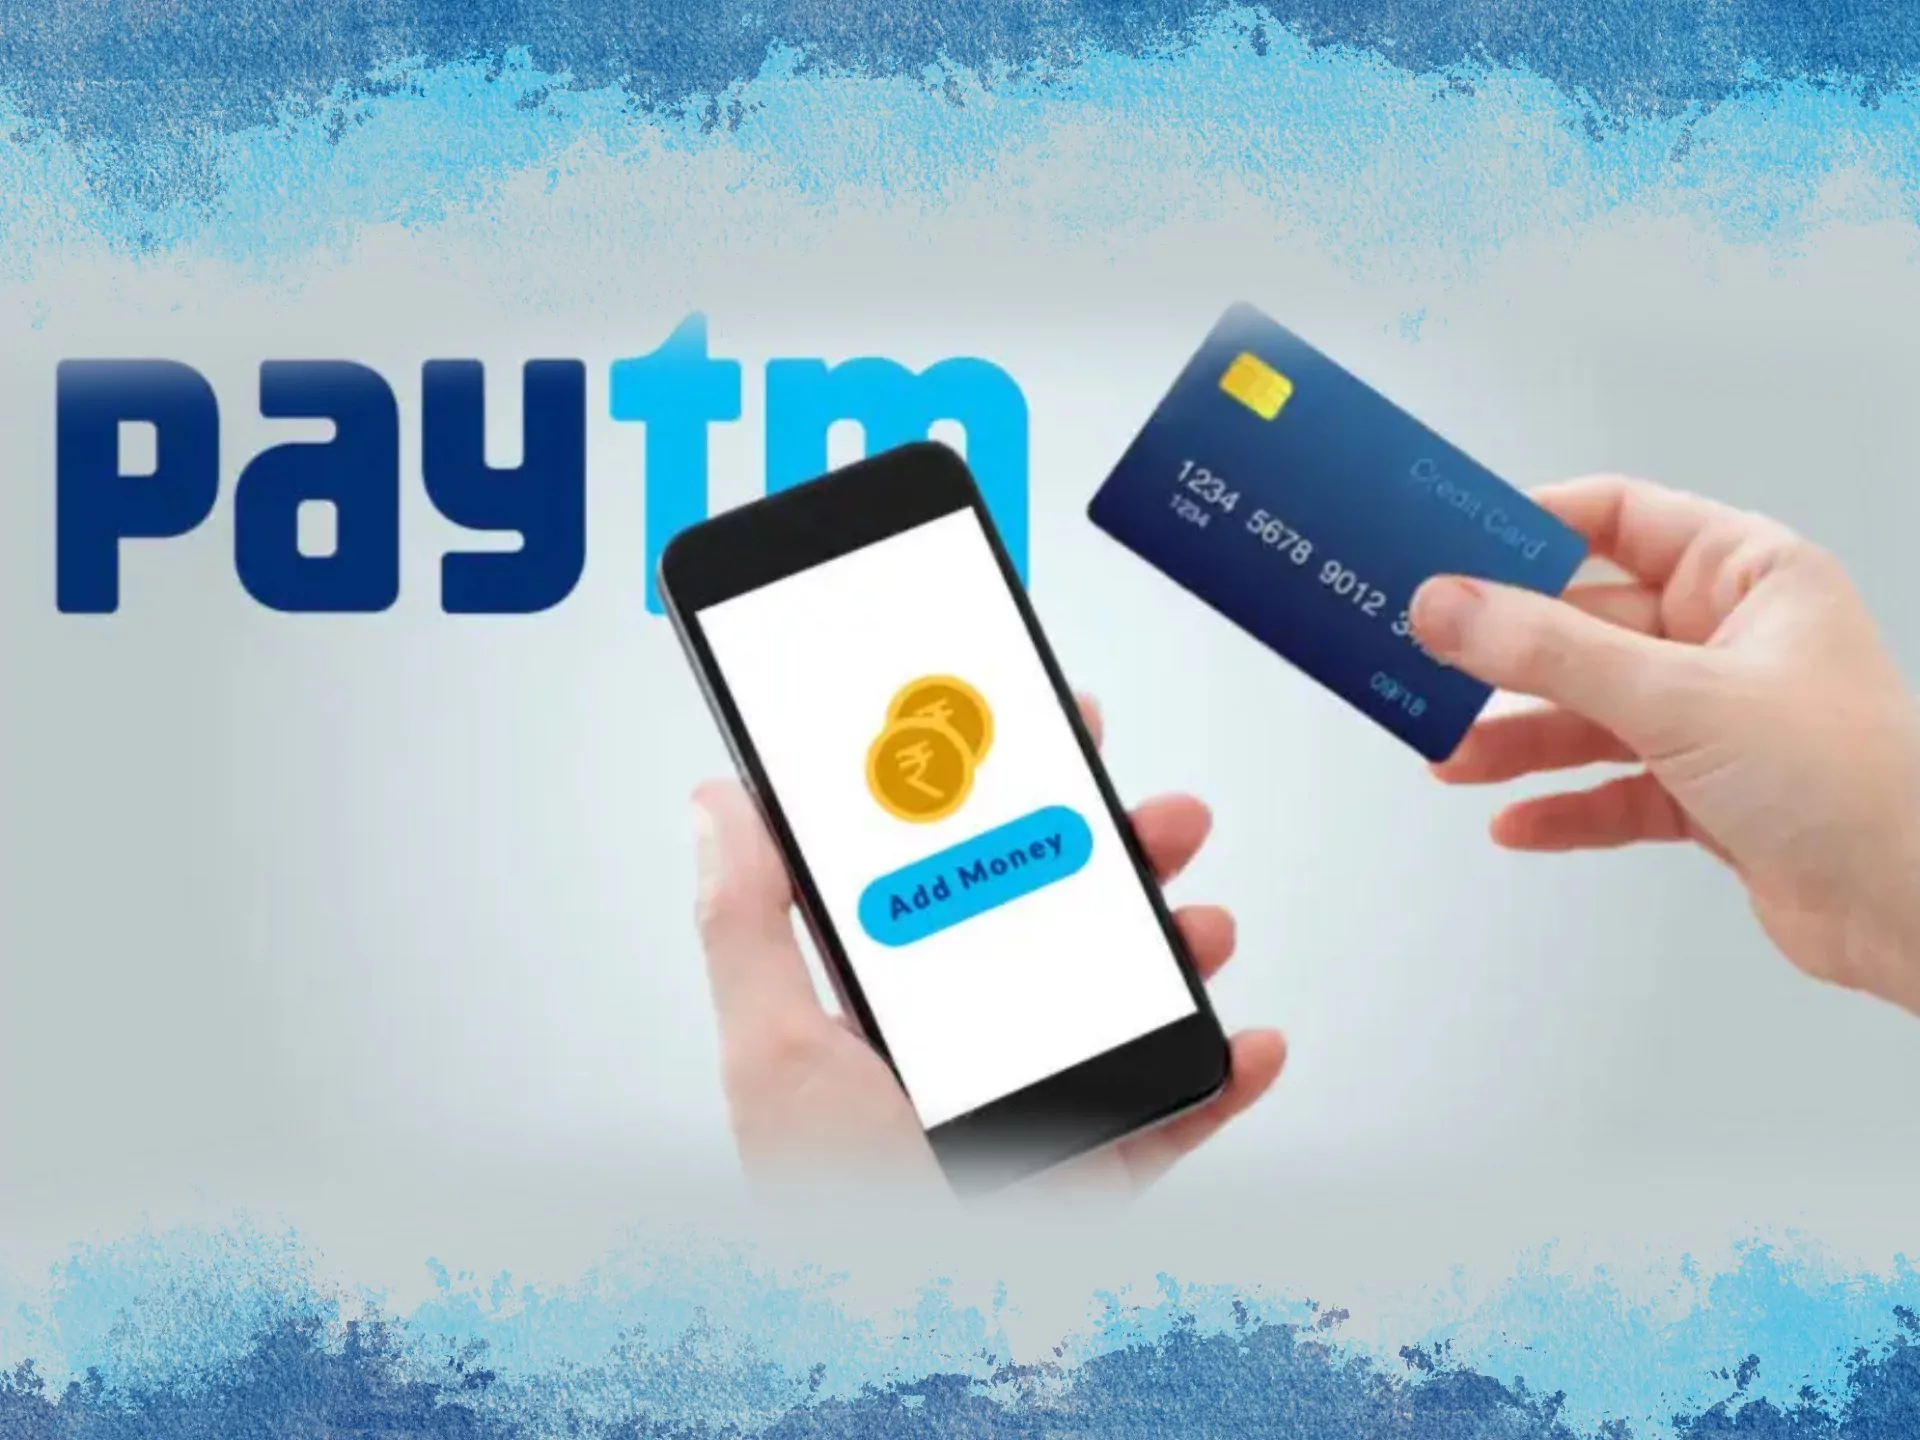 You won't have problems with tranfering monwy between Indian bank card and Paytm wallet.